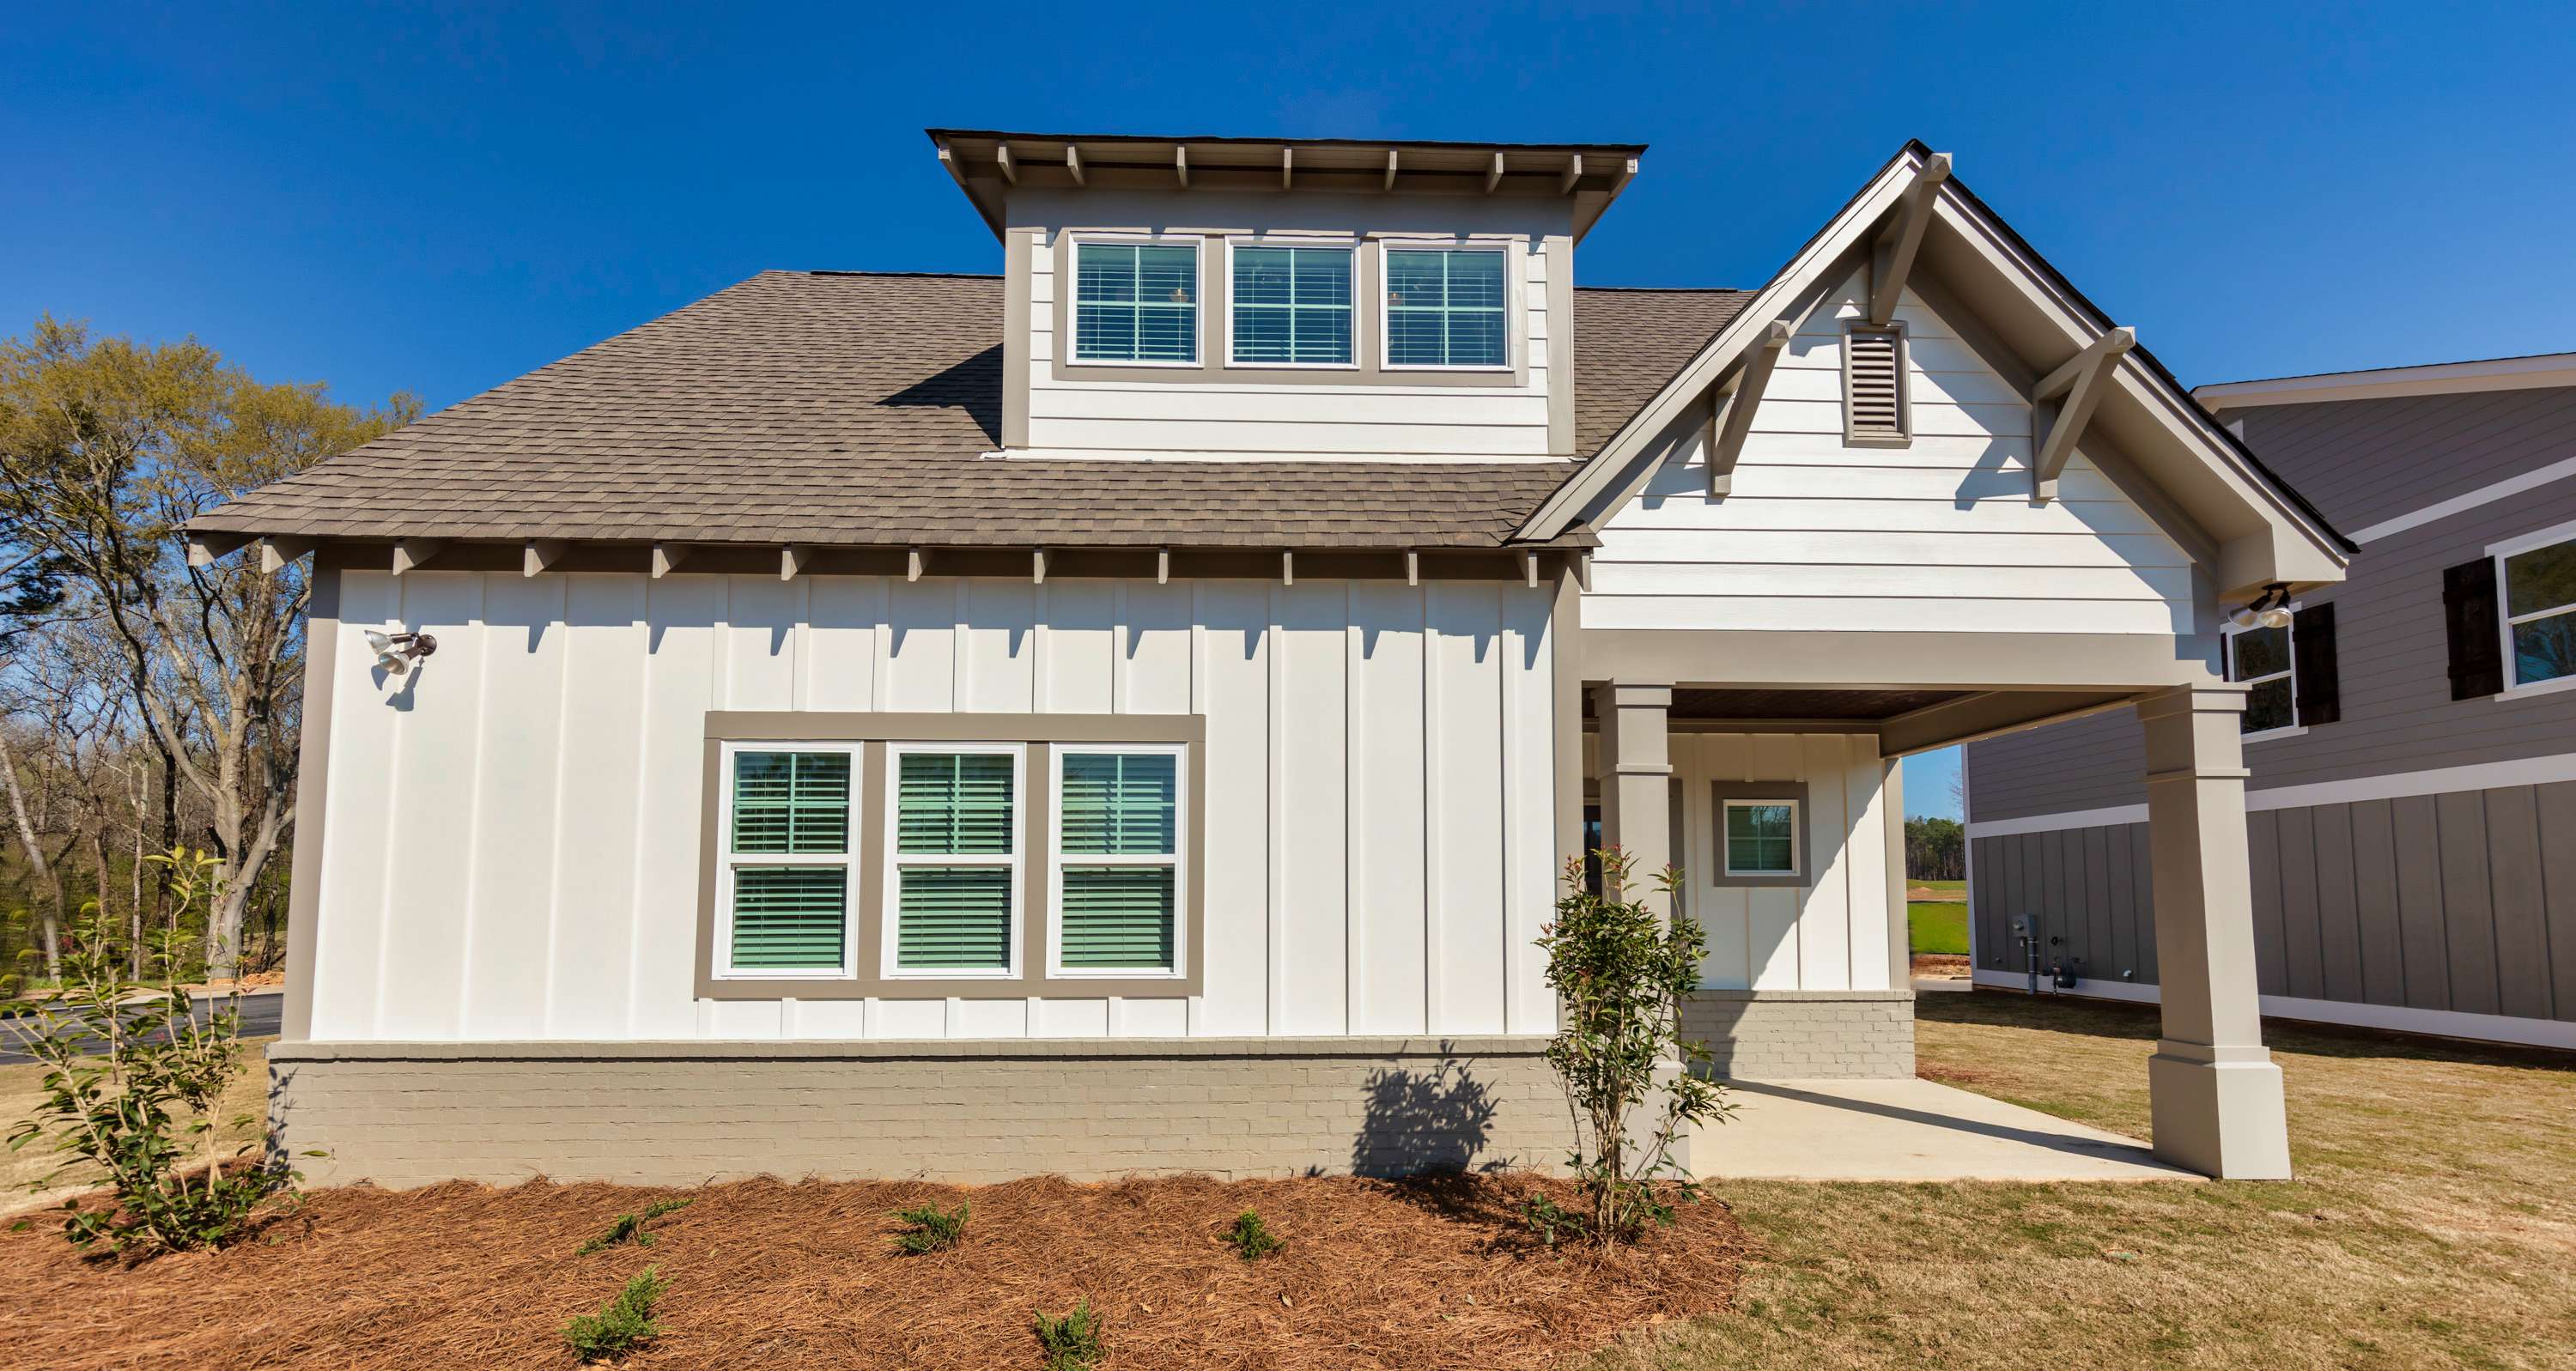 See the new model home at Oxmoor Village in Birmingham